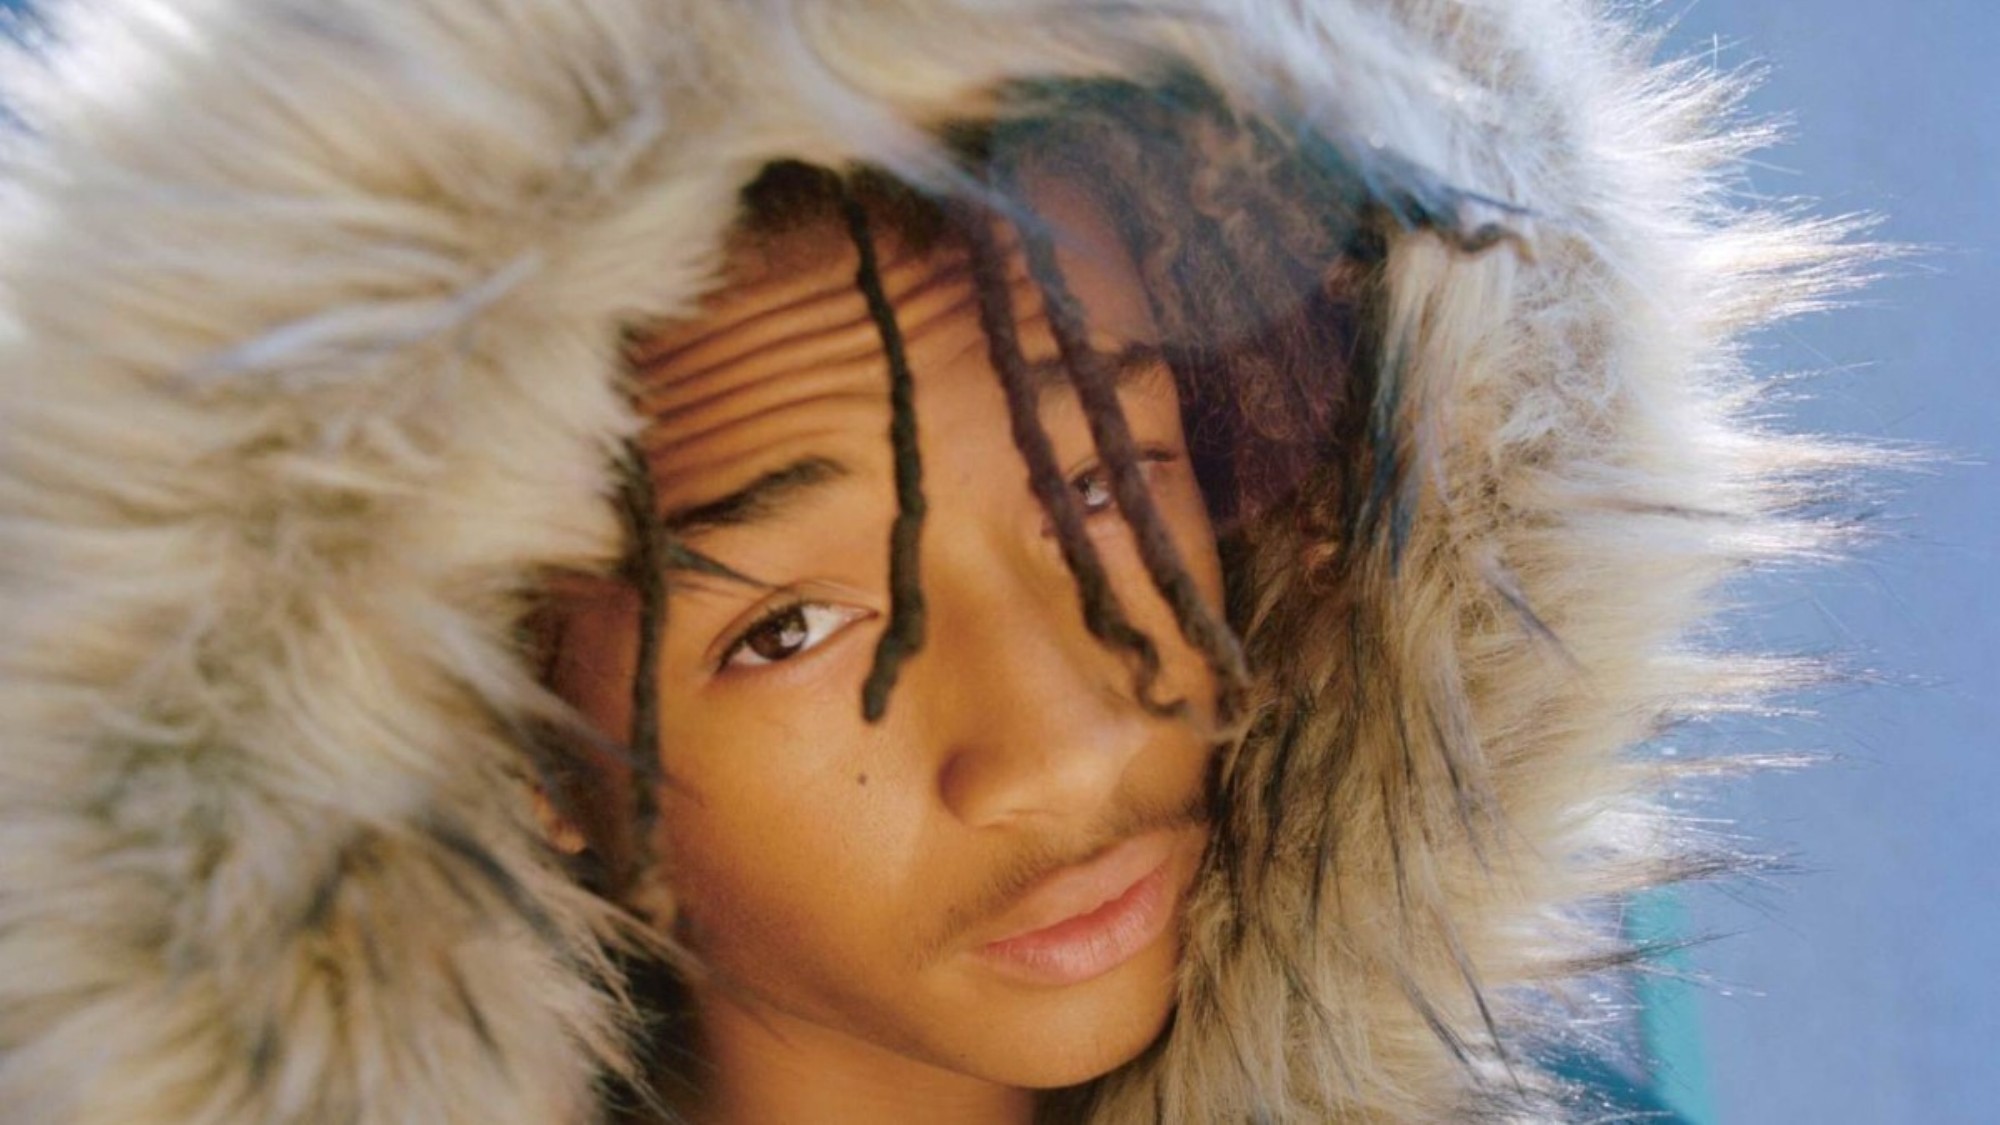 Why genderqueer and LGBTQ+ fashion icon Jaden Smith is fighting for the  right to self-expression for his generation